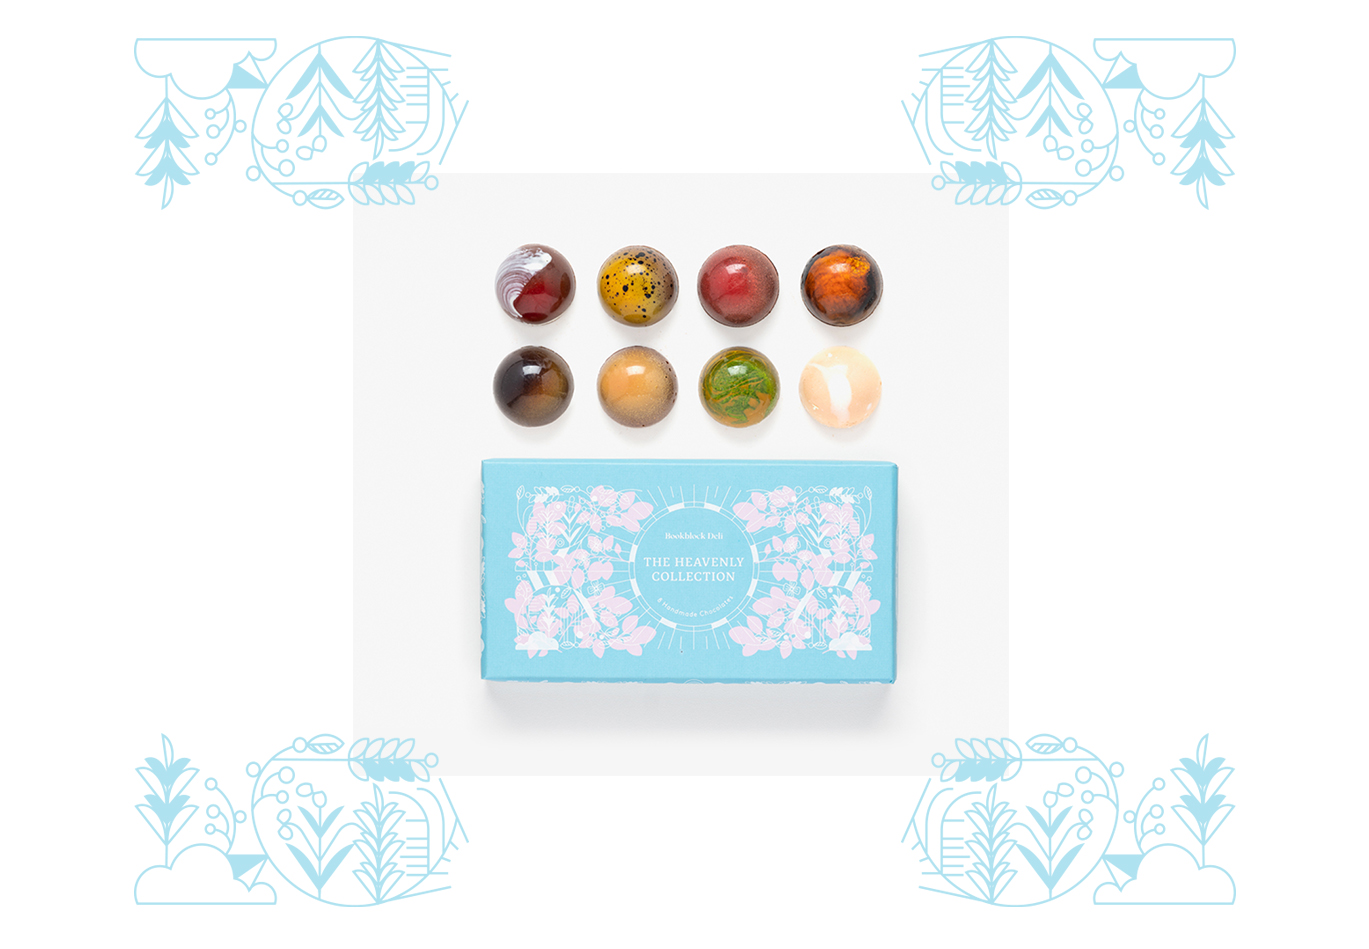 Bookblock's Heavenly Collection of Handmade Chocolates with illustrative detail.